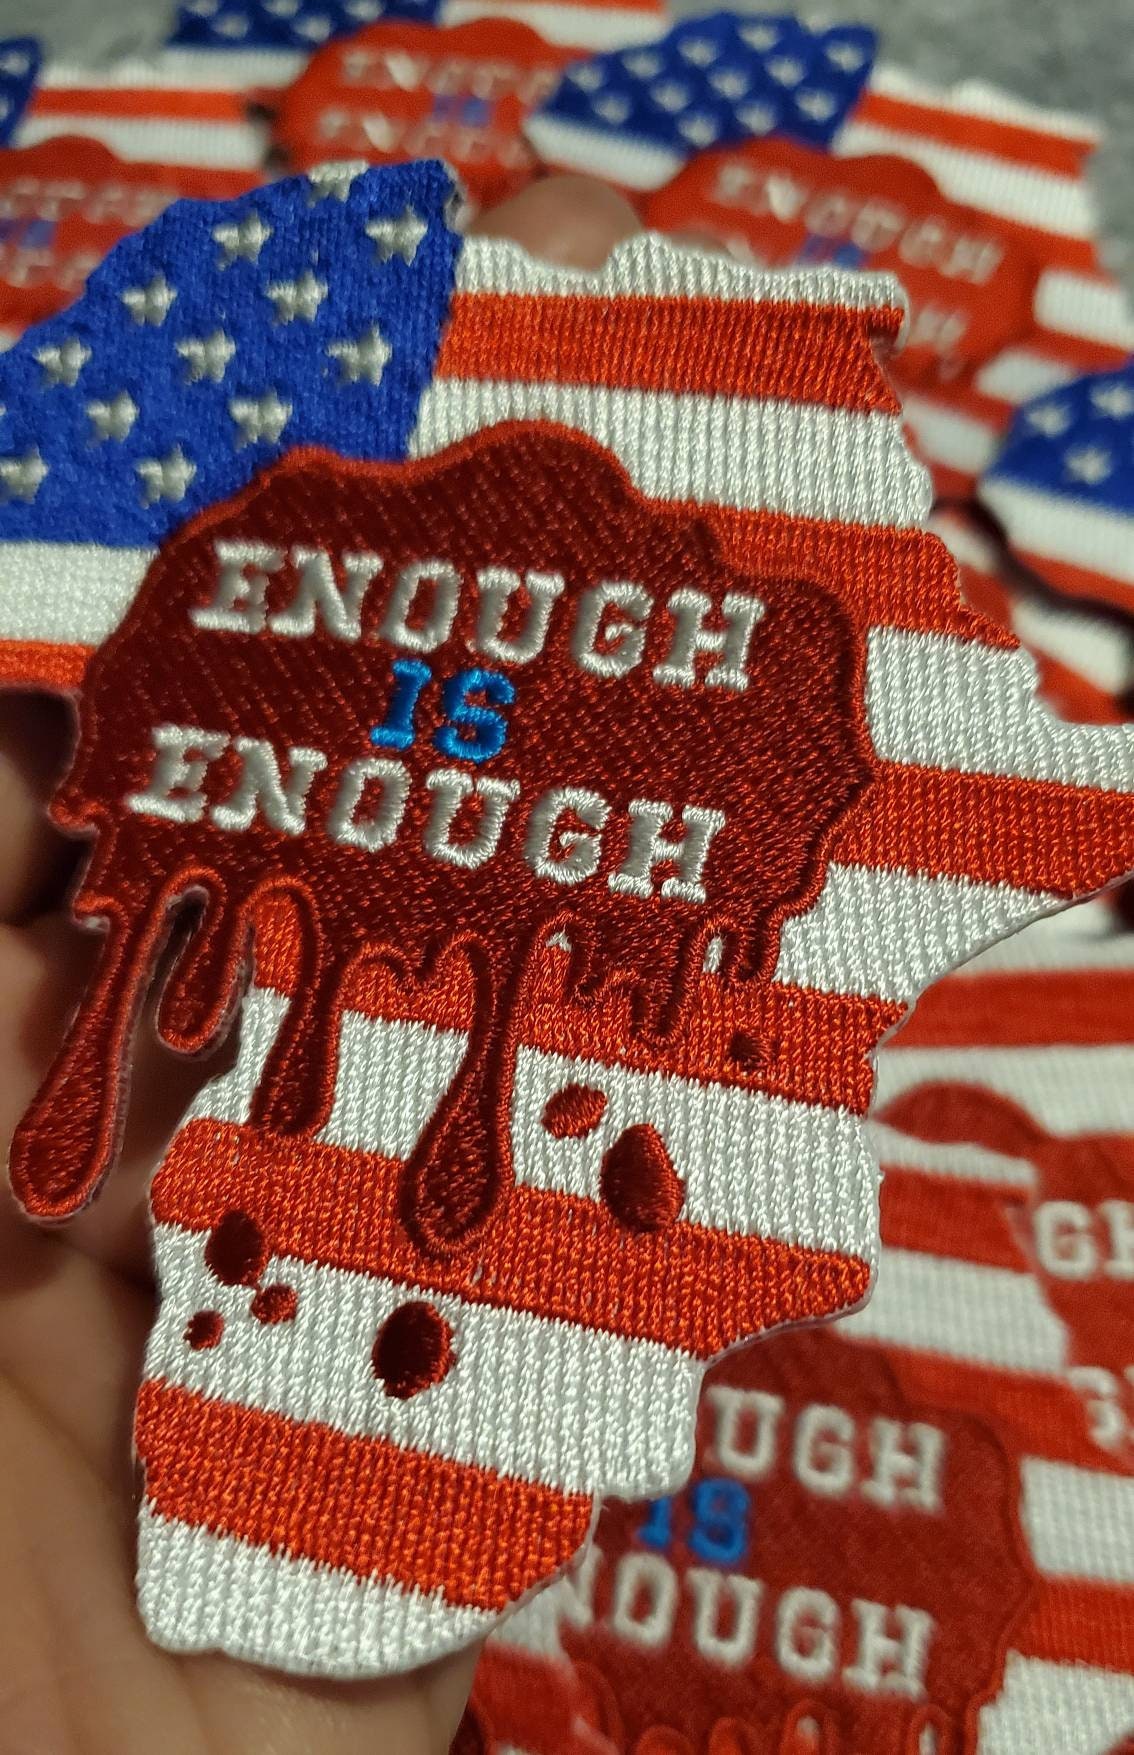 Exclusive, "Enough is Enough" Blood Shed | African-American Flag | Iron-On Embroidered Patch, Size 4", Collectable Appliques, BLM Gifts